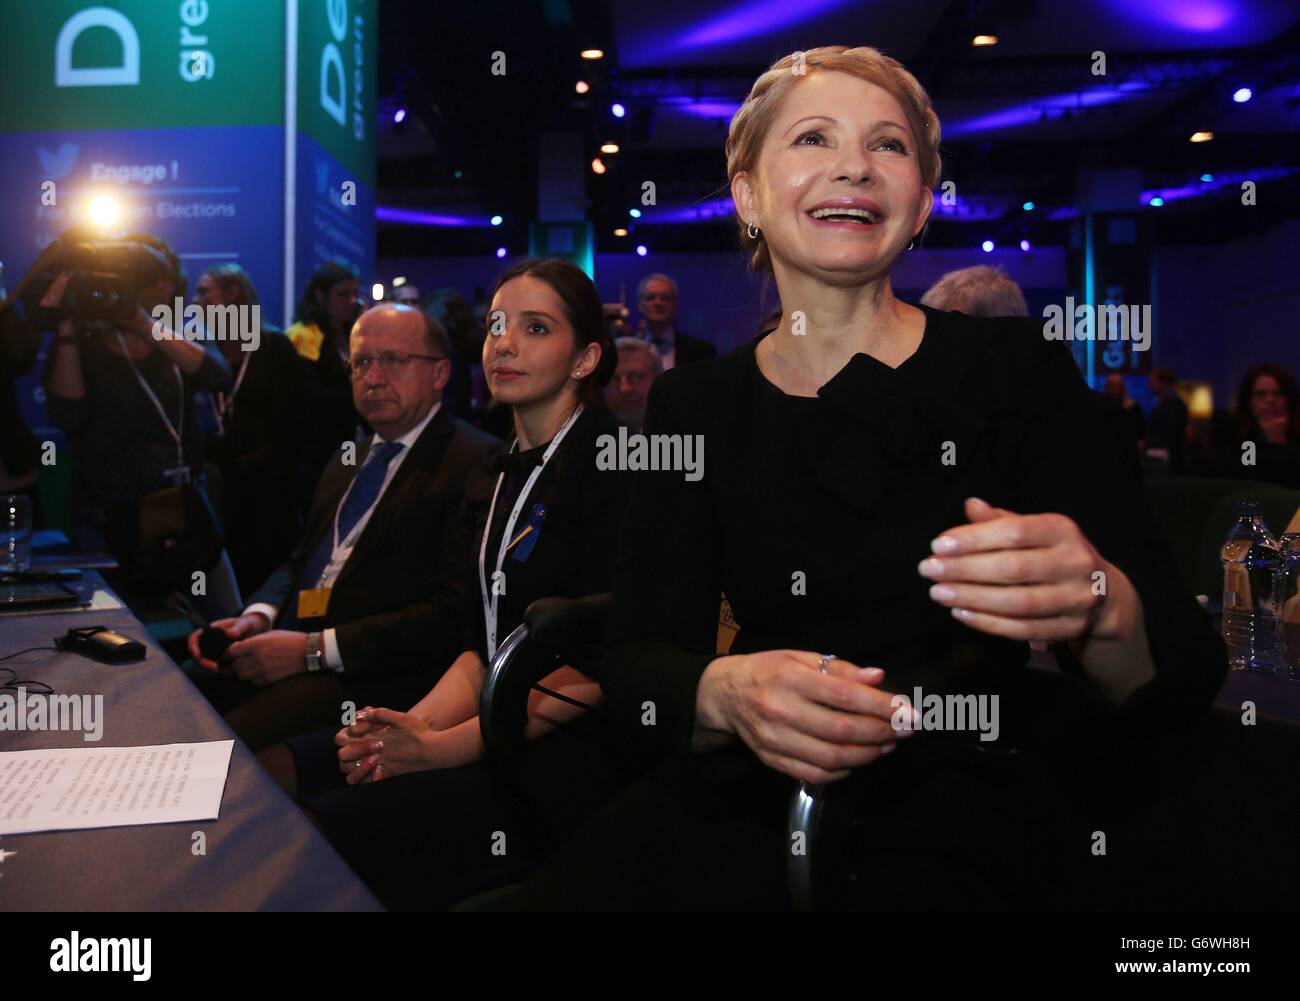 Former Ukrainian Prime Minister Yulia Tymoshenko (right) with her daughter Eugenia Tymoshenko (centre) at the European People's Party Congress in the Convention Centre, Dublin. Stock Photo